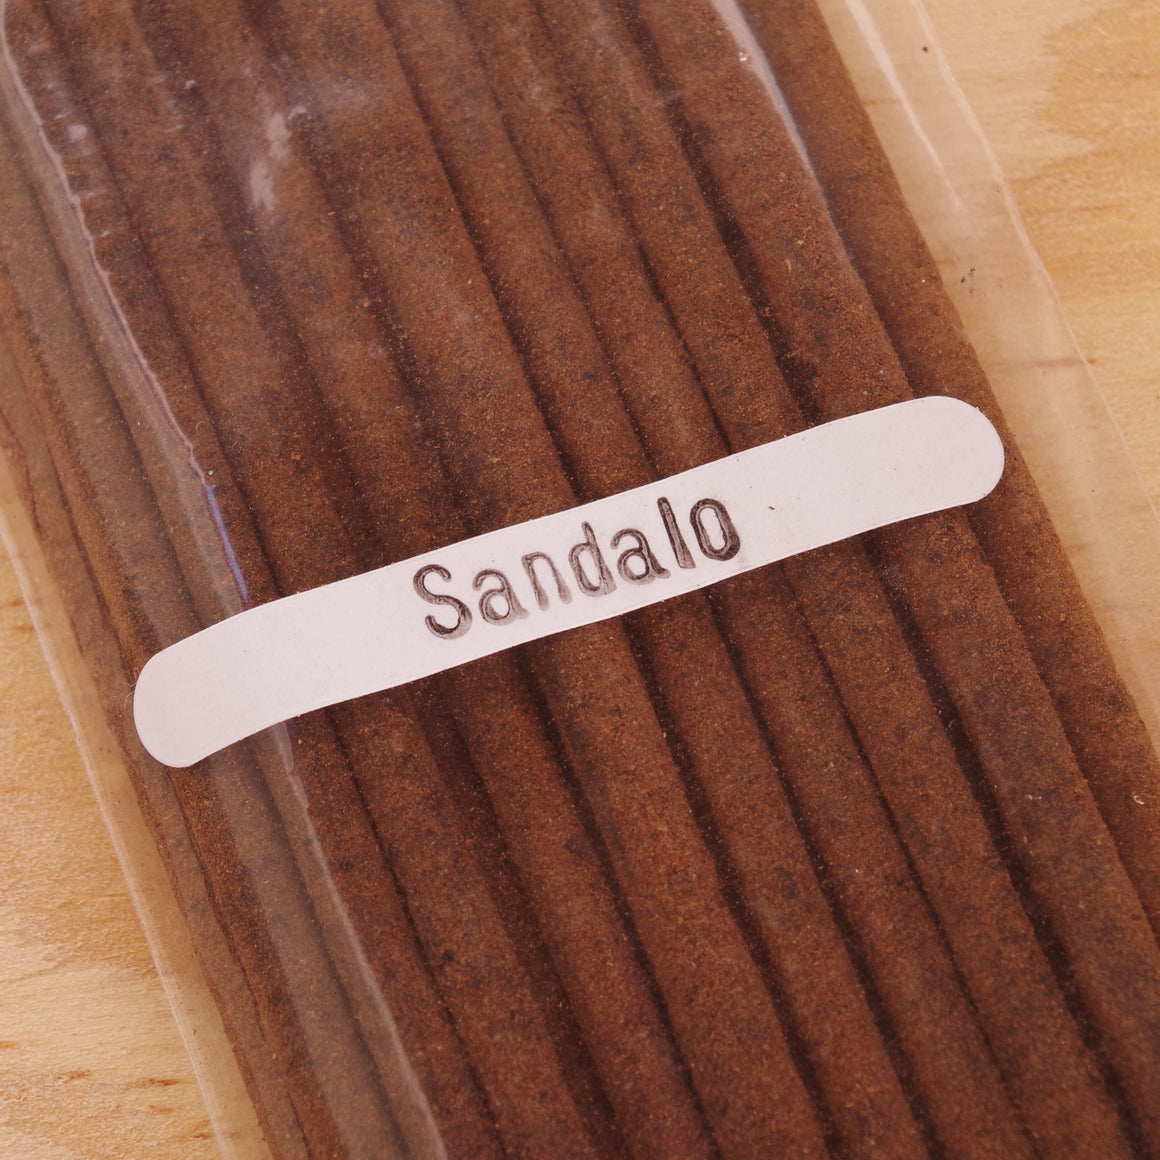 40 sticks Sandalwood Incense Handrolled in Mexico Long Duration 1.5 hours